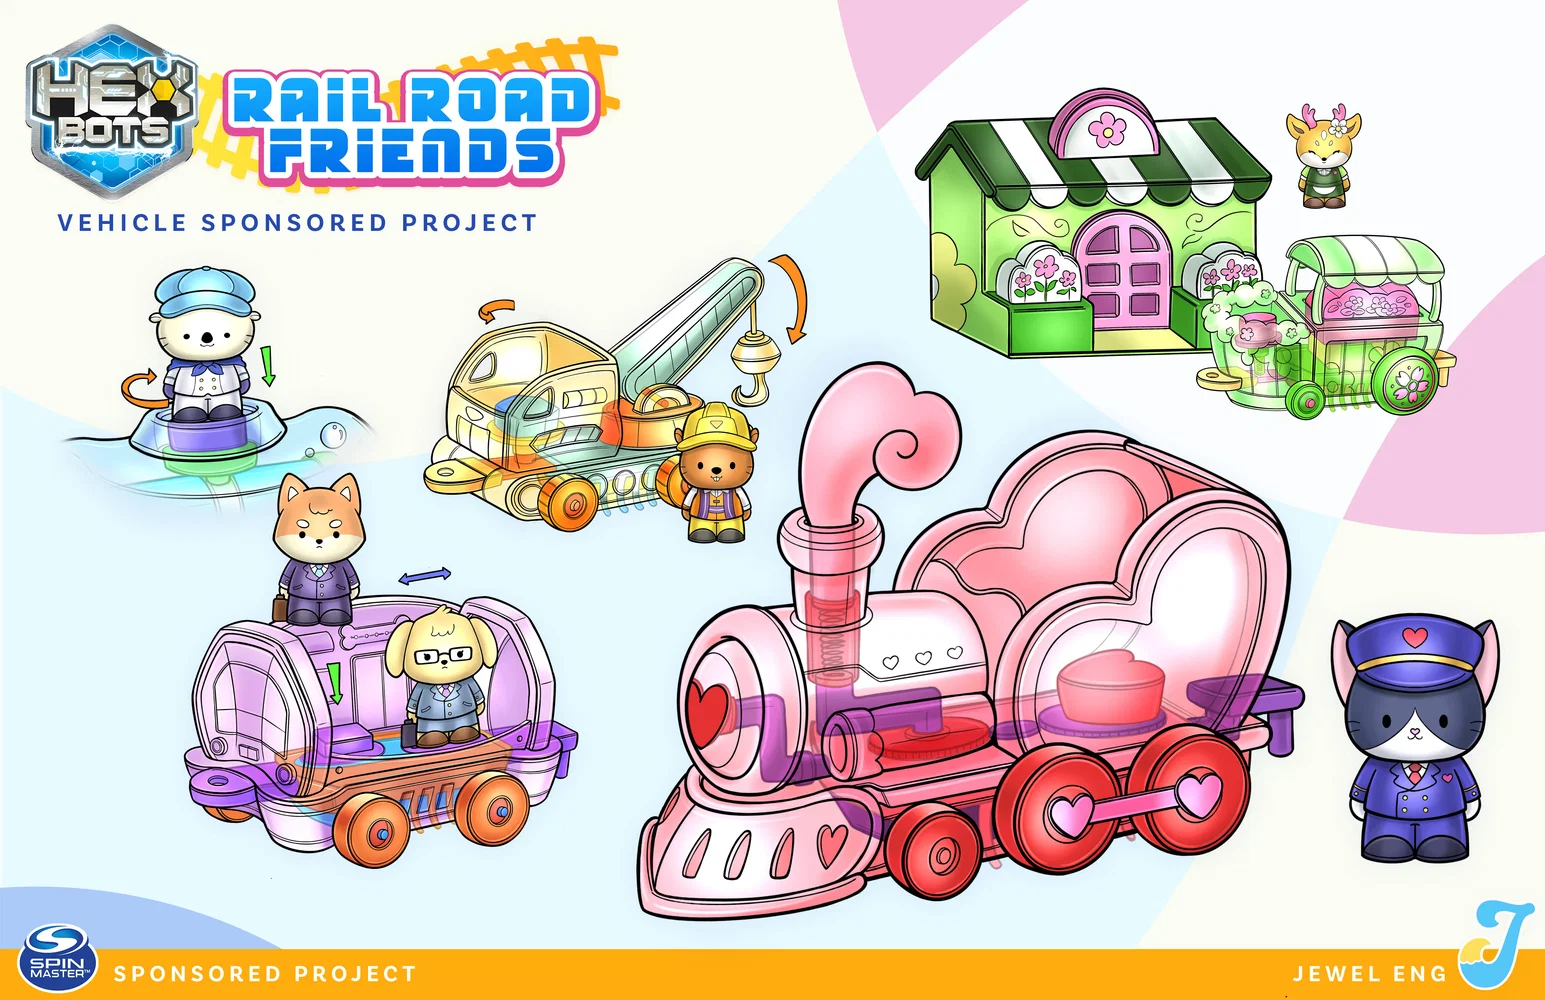 A portfolio page for Railroad Friends, showing a set of train carriages that are bright but also translucent. Each train has an accompanying animal friend figure.  